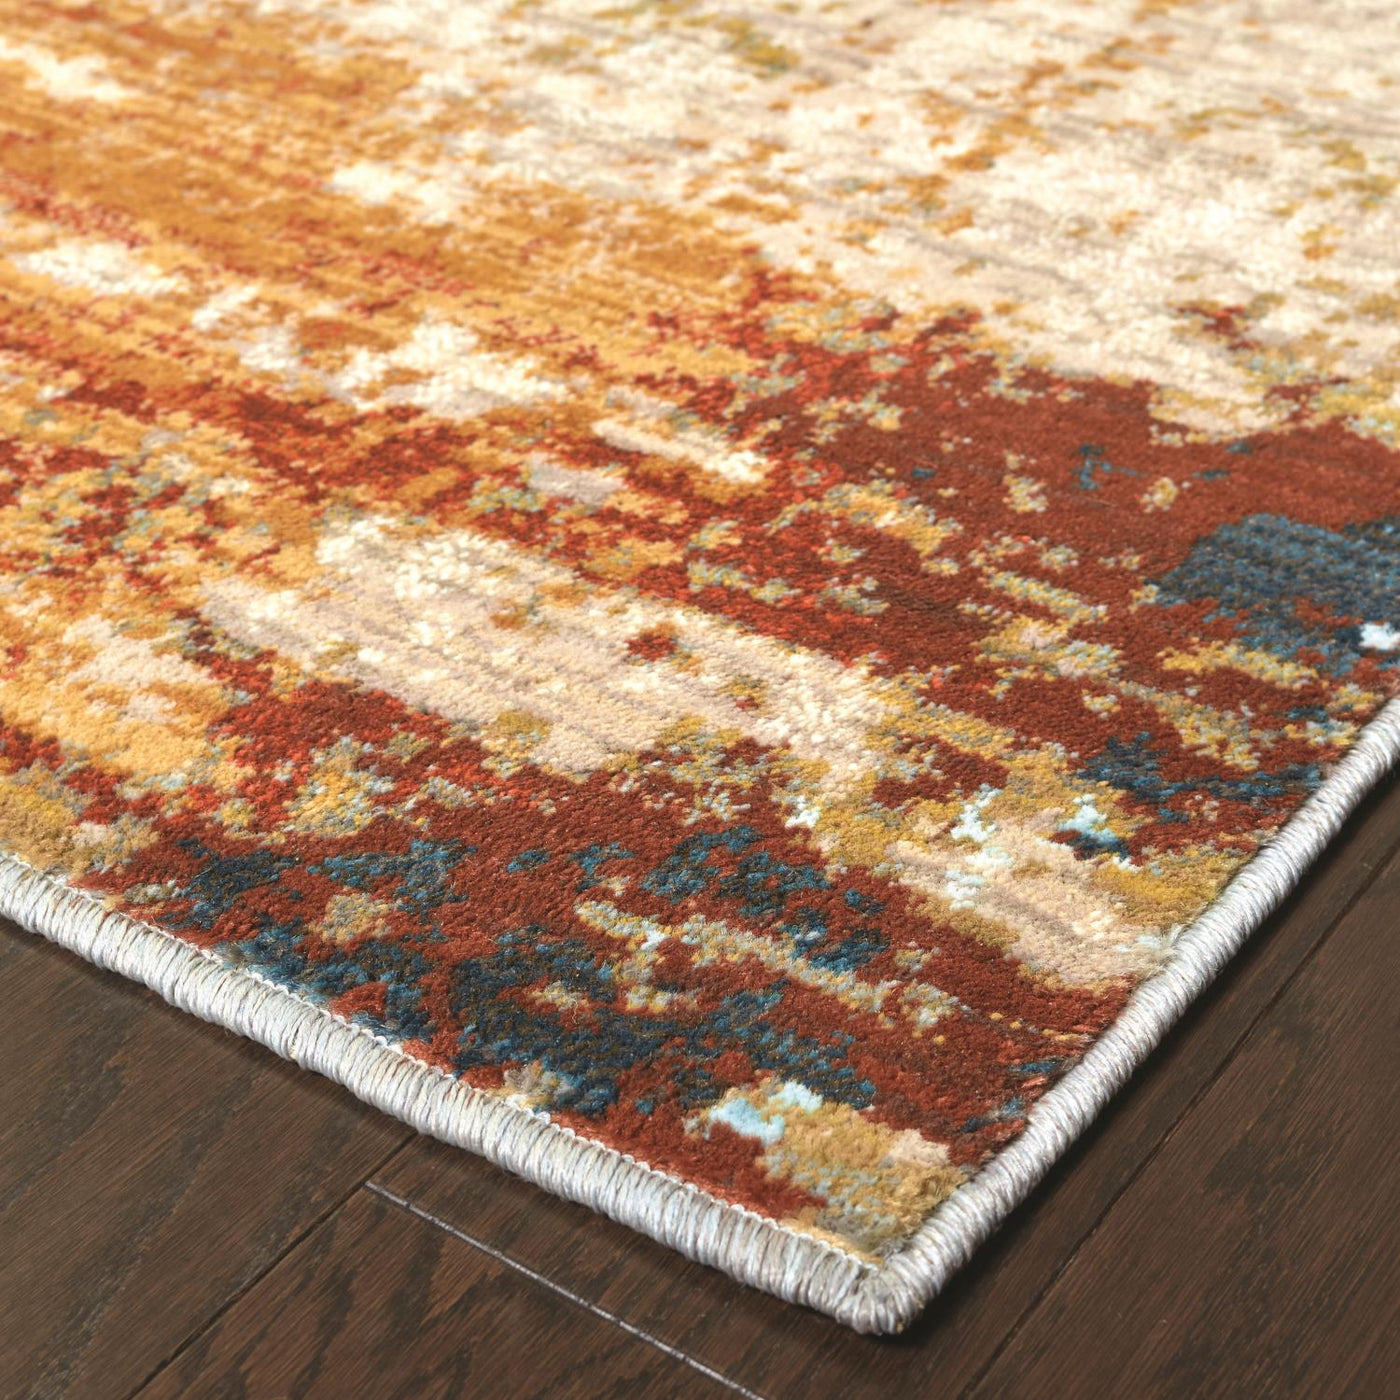 Tempe W6365AL Eroded Abstract Area Rug (5'3"X7'6")